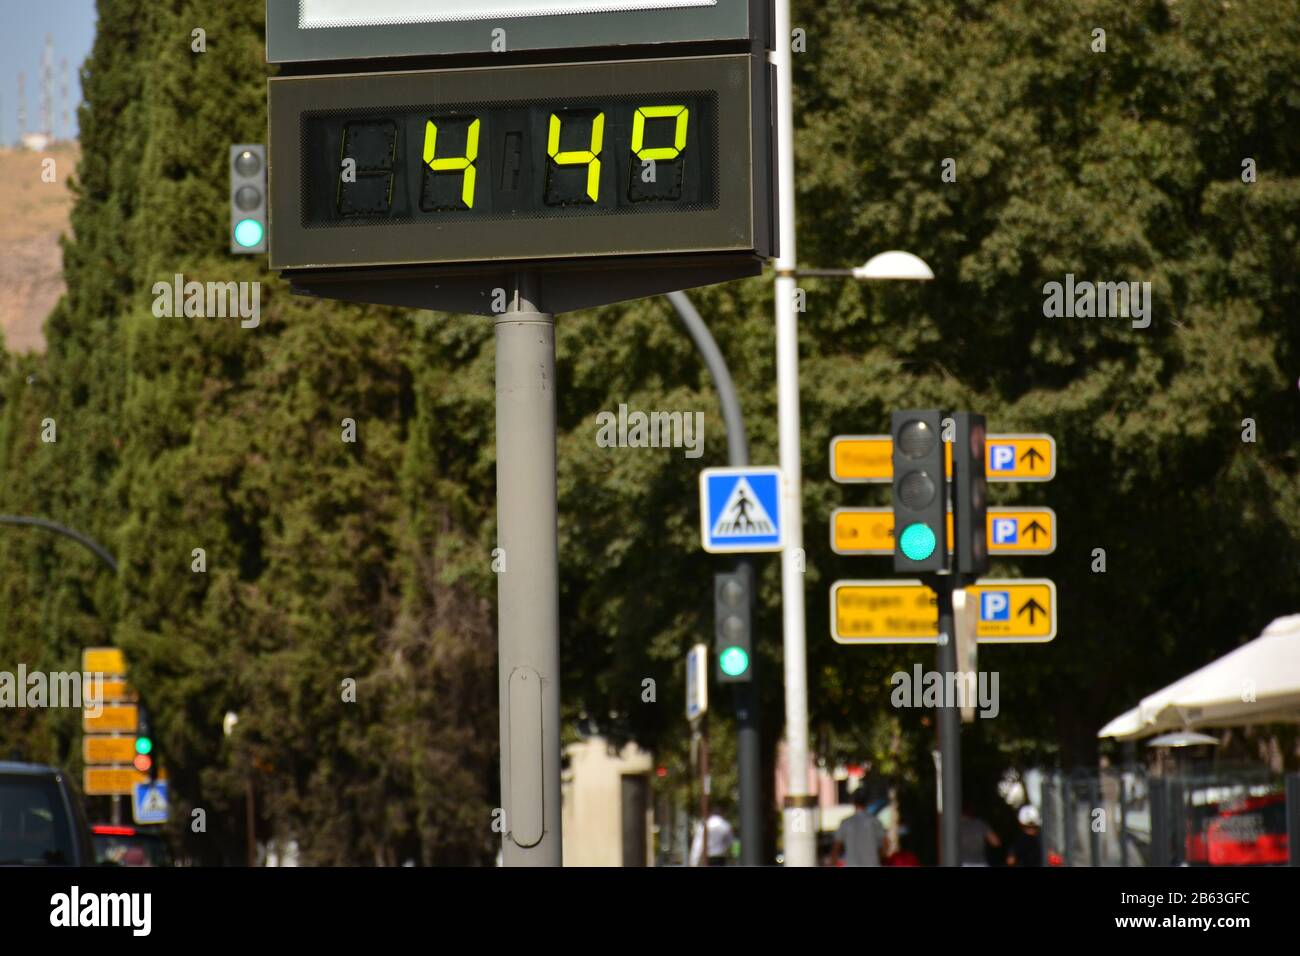 Street thermometer on a city street marking 44 degrees celsius Stock Photo